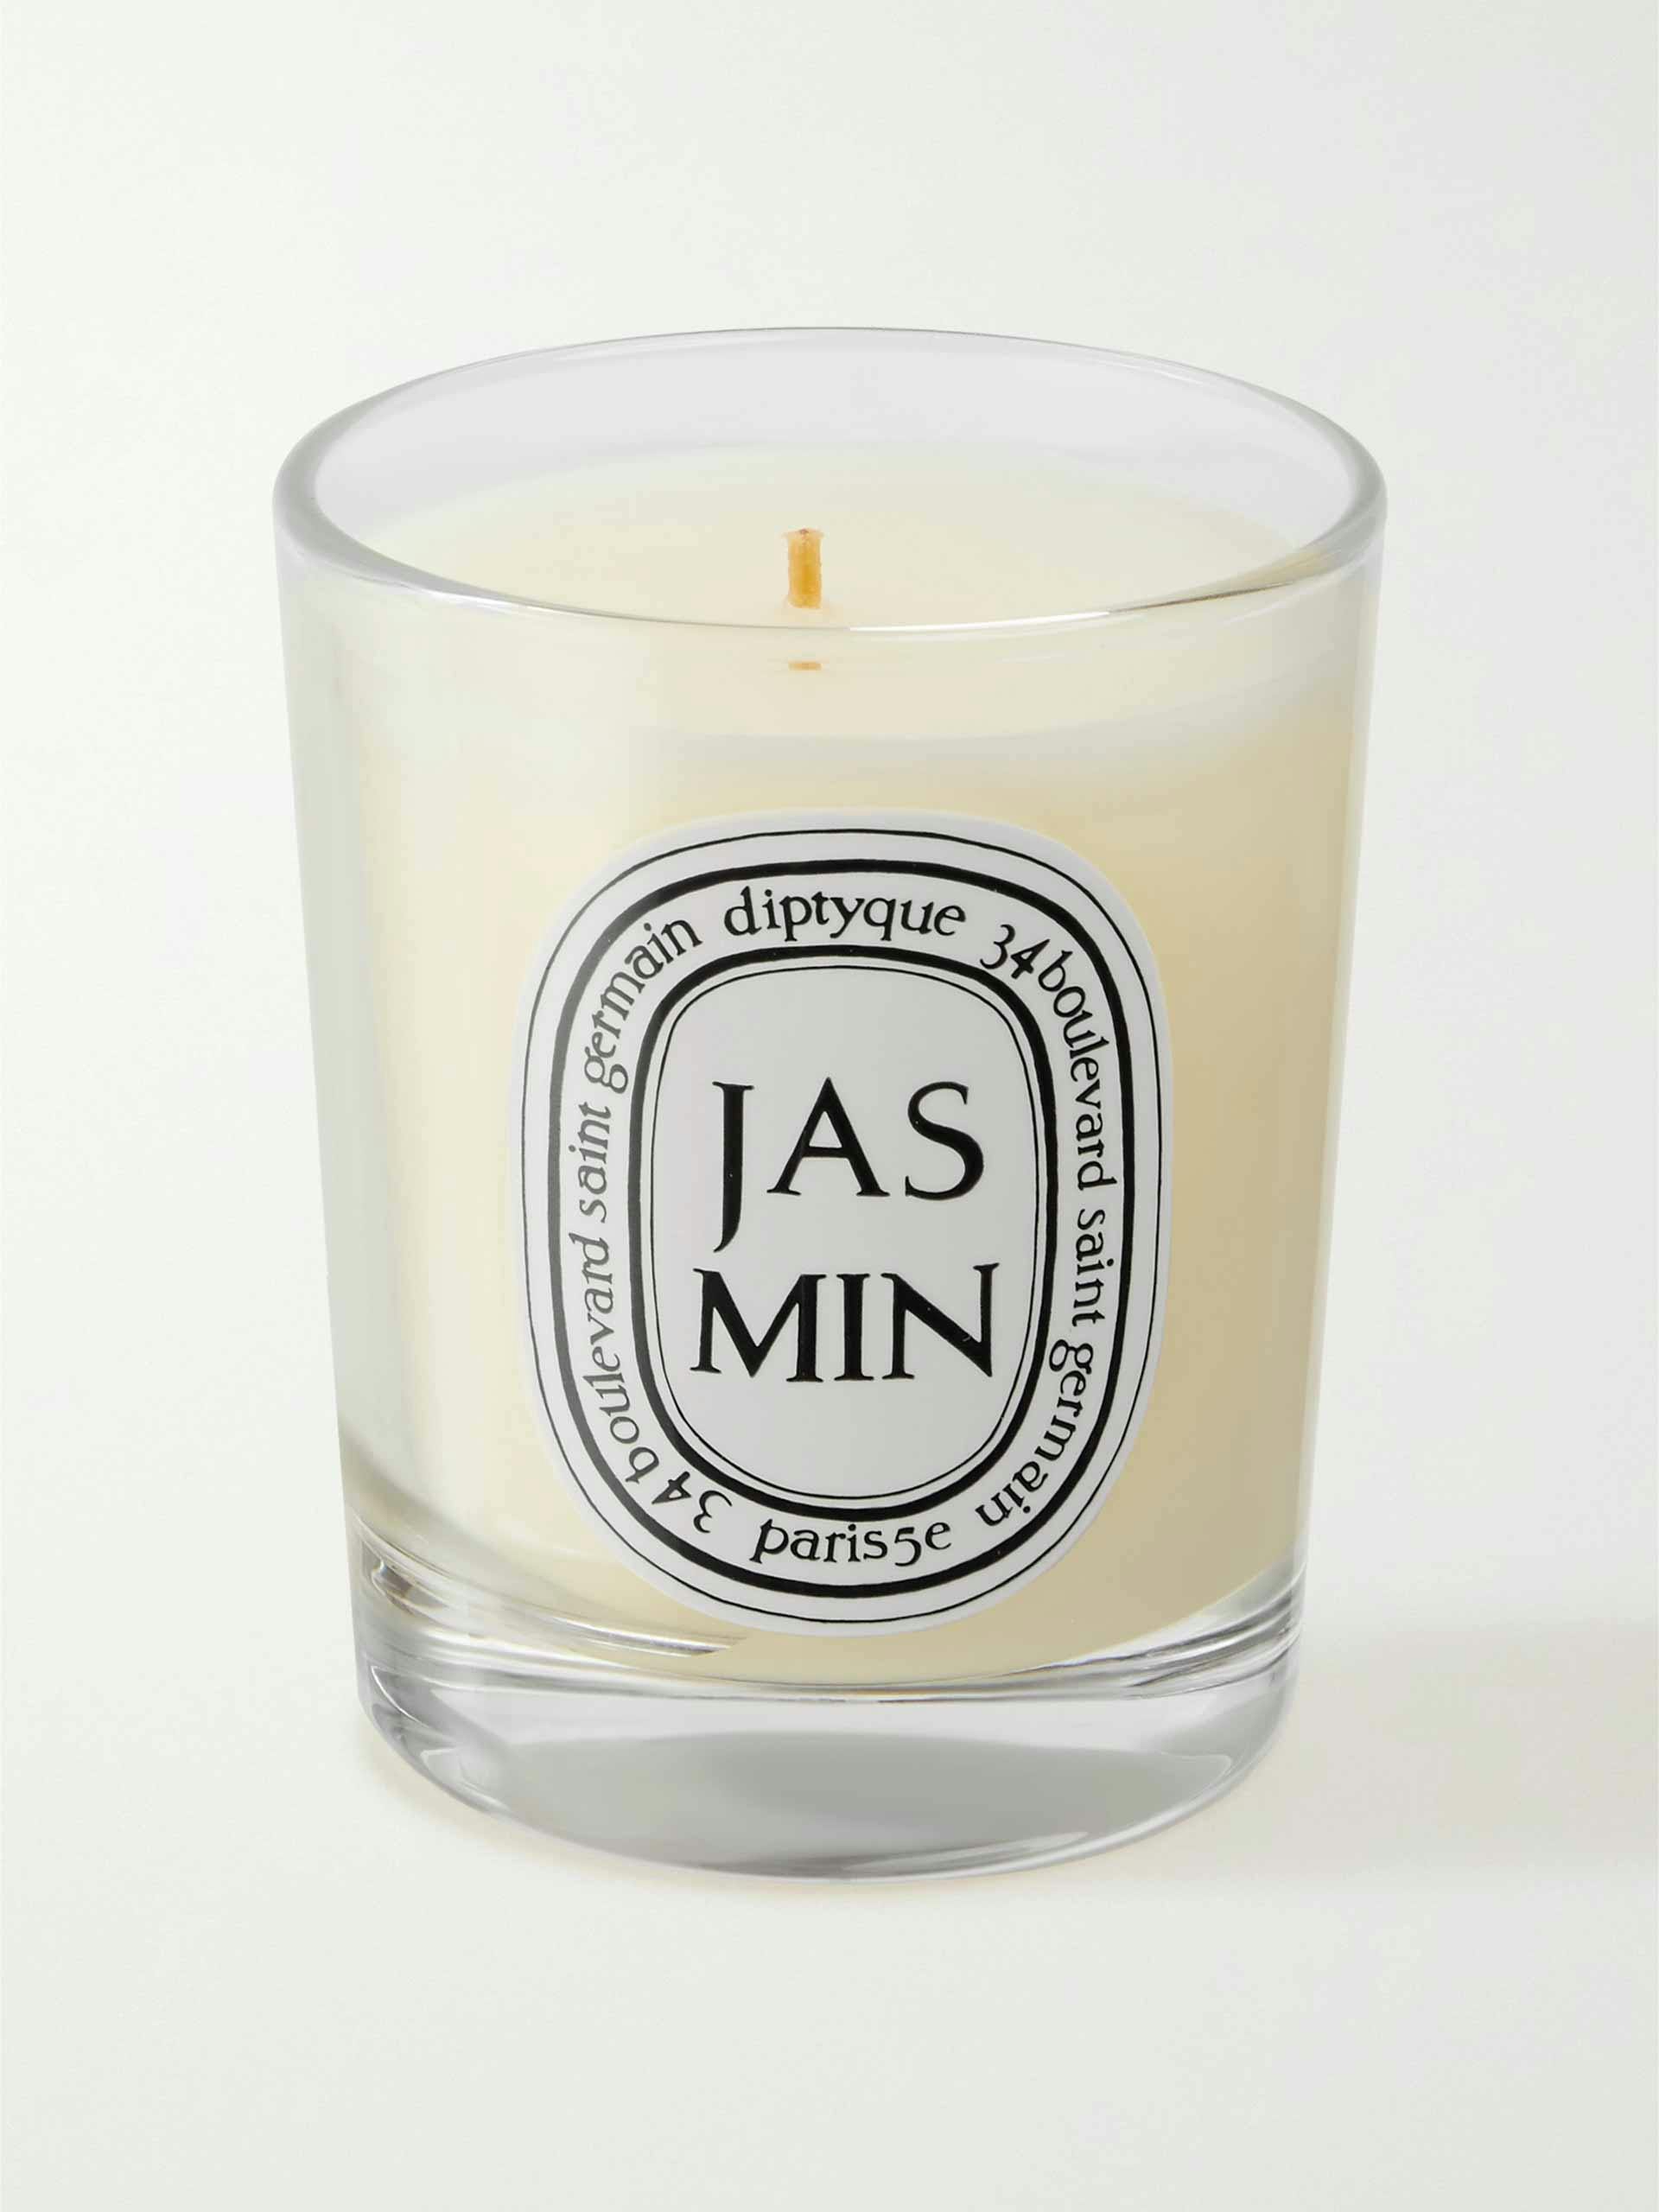 Jasmin scented candle